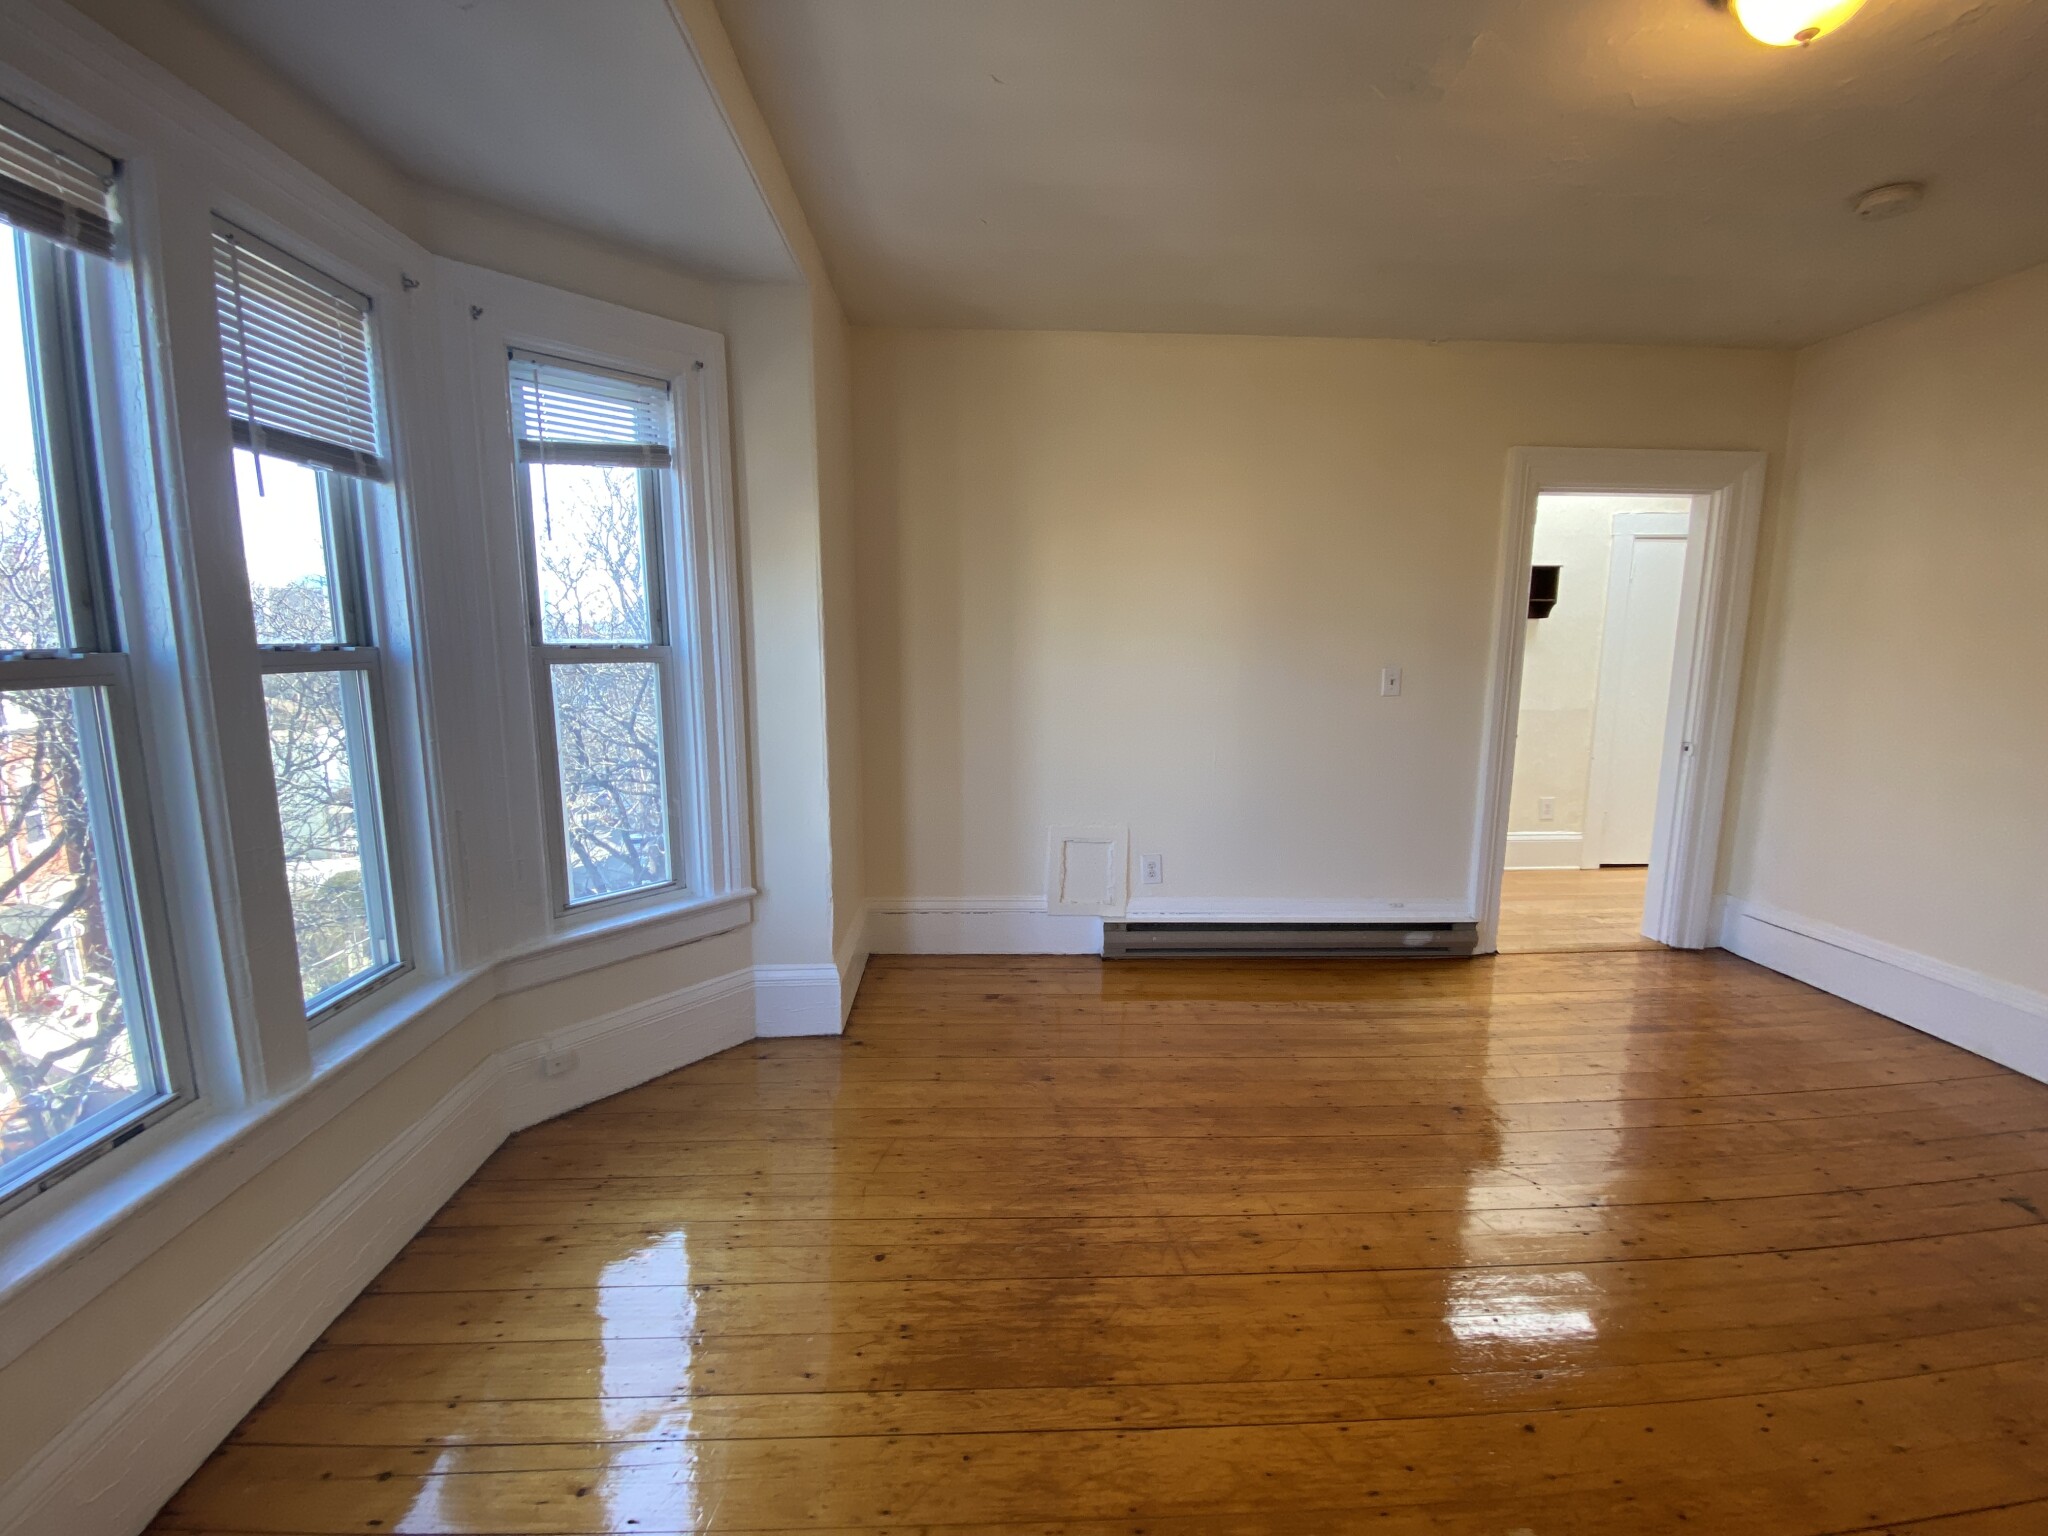 Photos of apartment on Florence St.,Somerville MA 02143